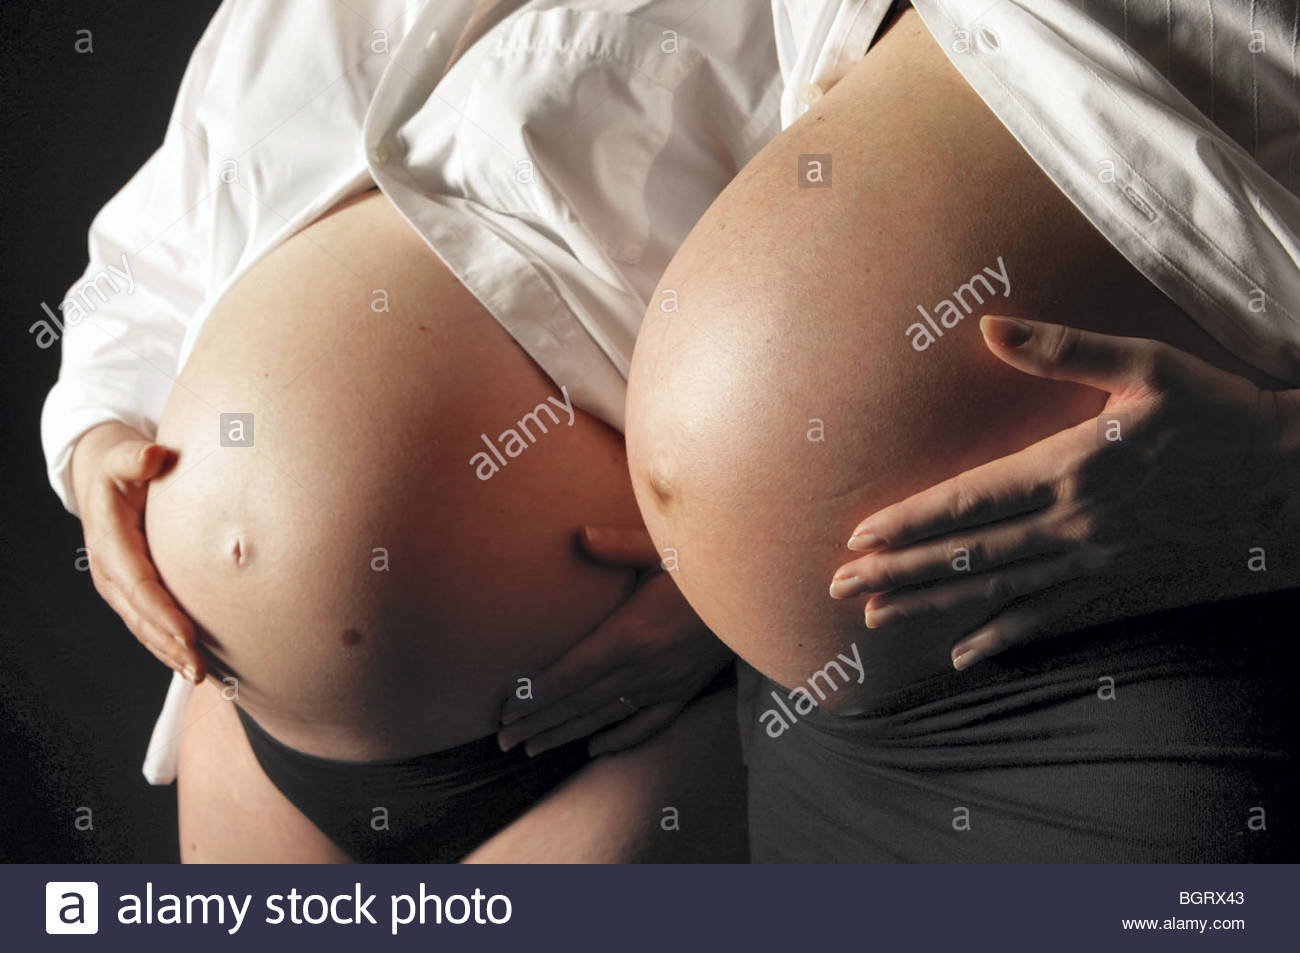 Pictures Pregnant Women Bellies 118